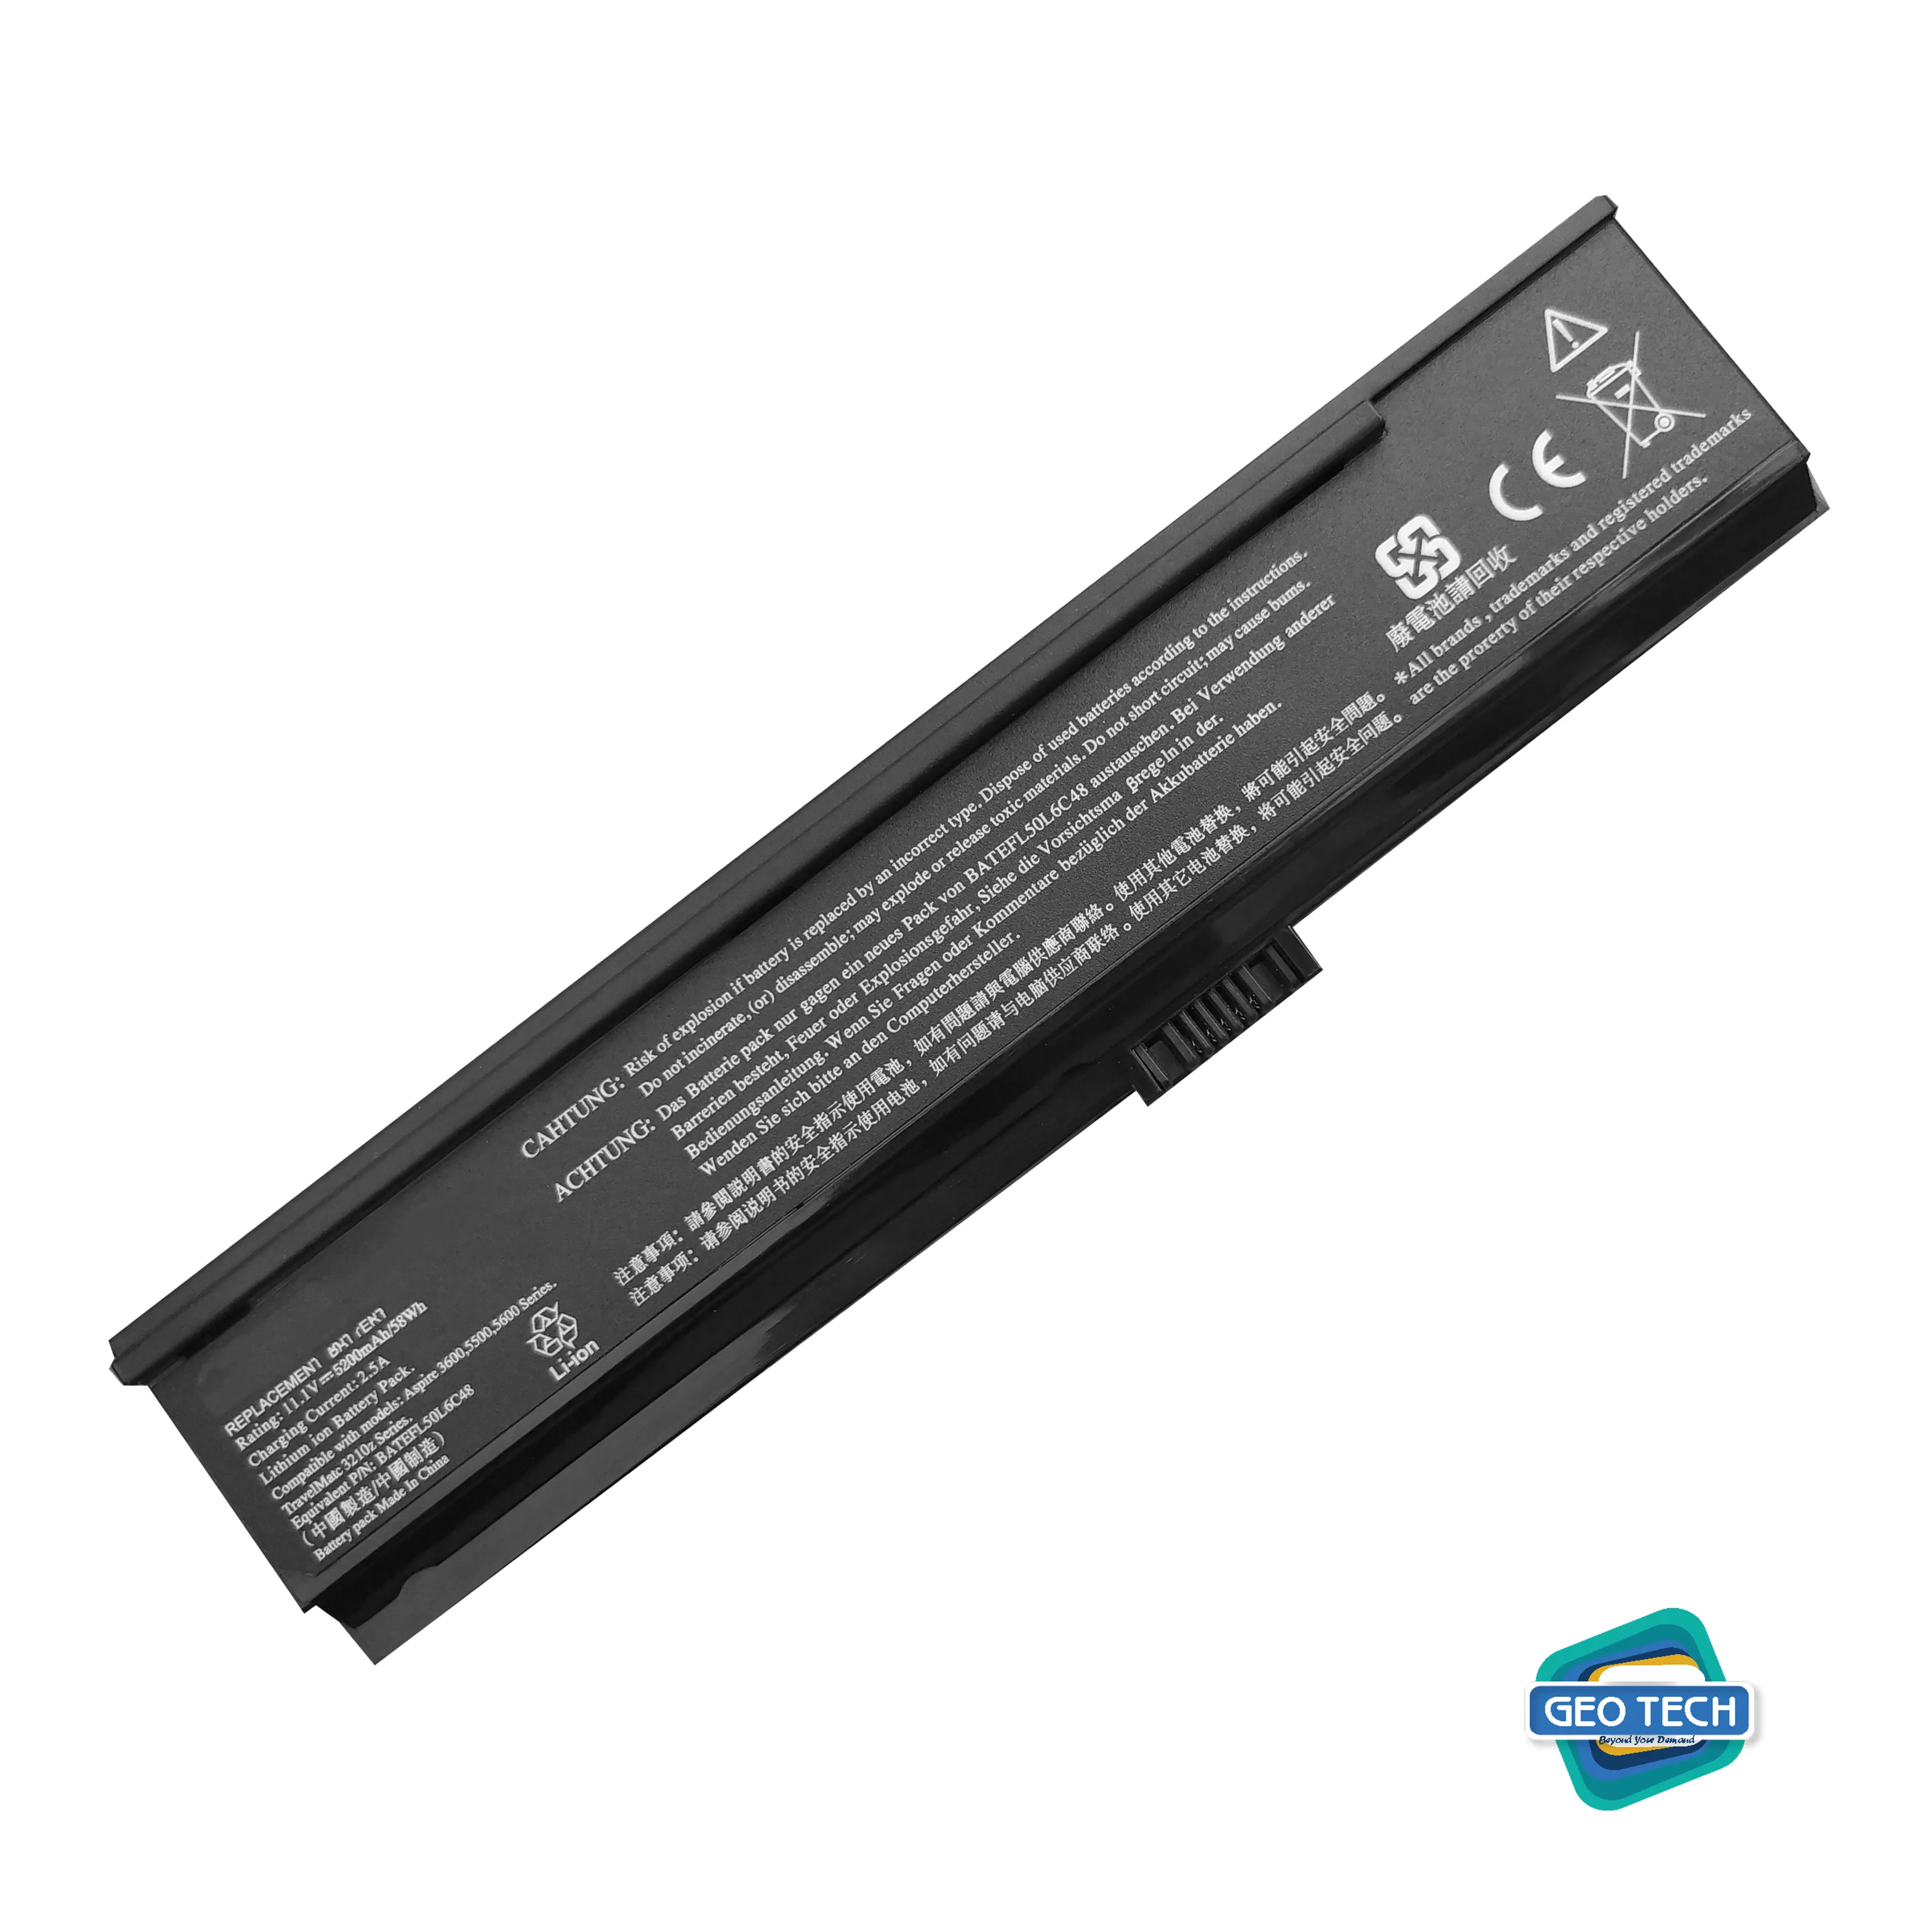 Replacement Acer Aspire 5500 Battery | High Quality Acer Aspire 5500 Battery